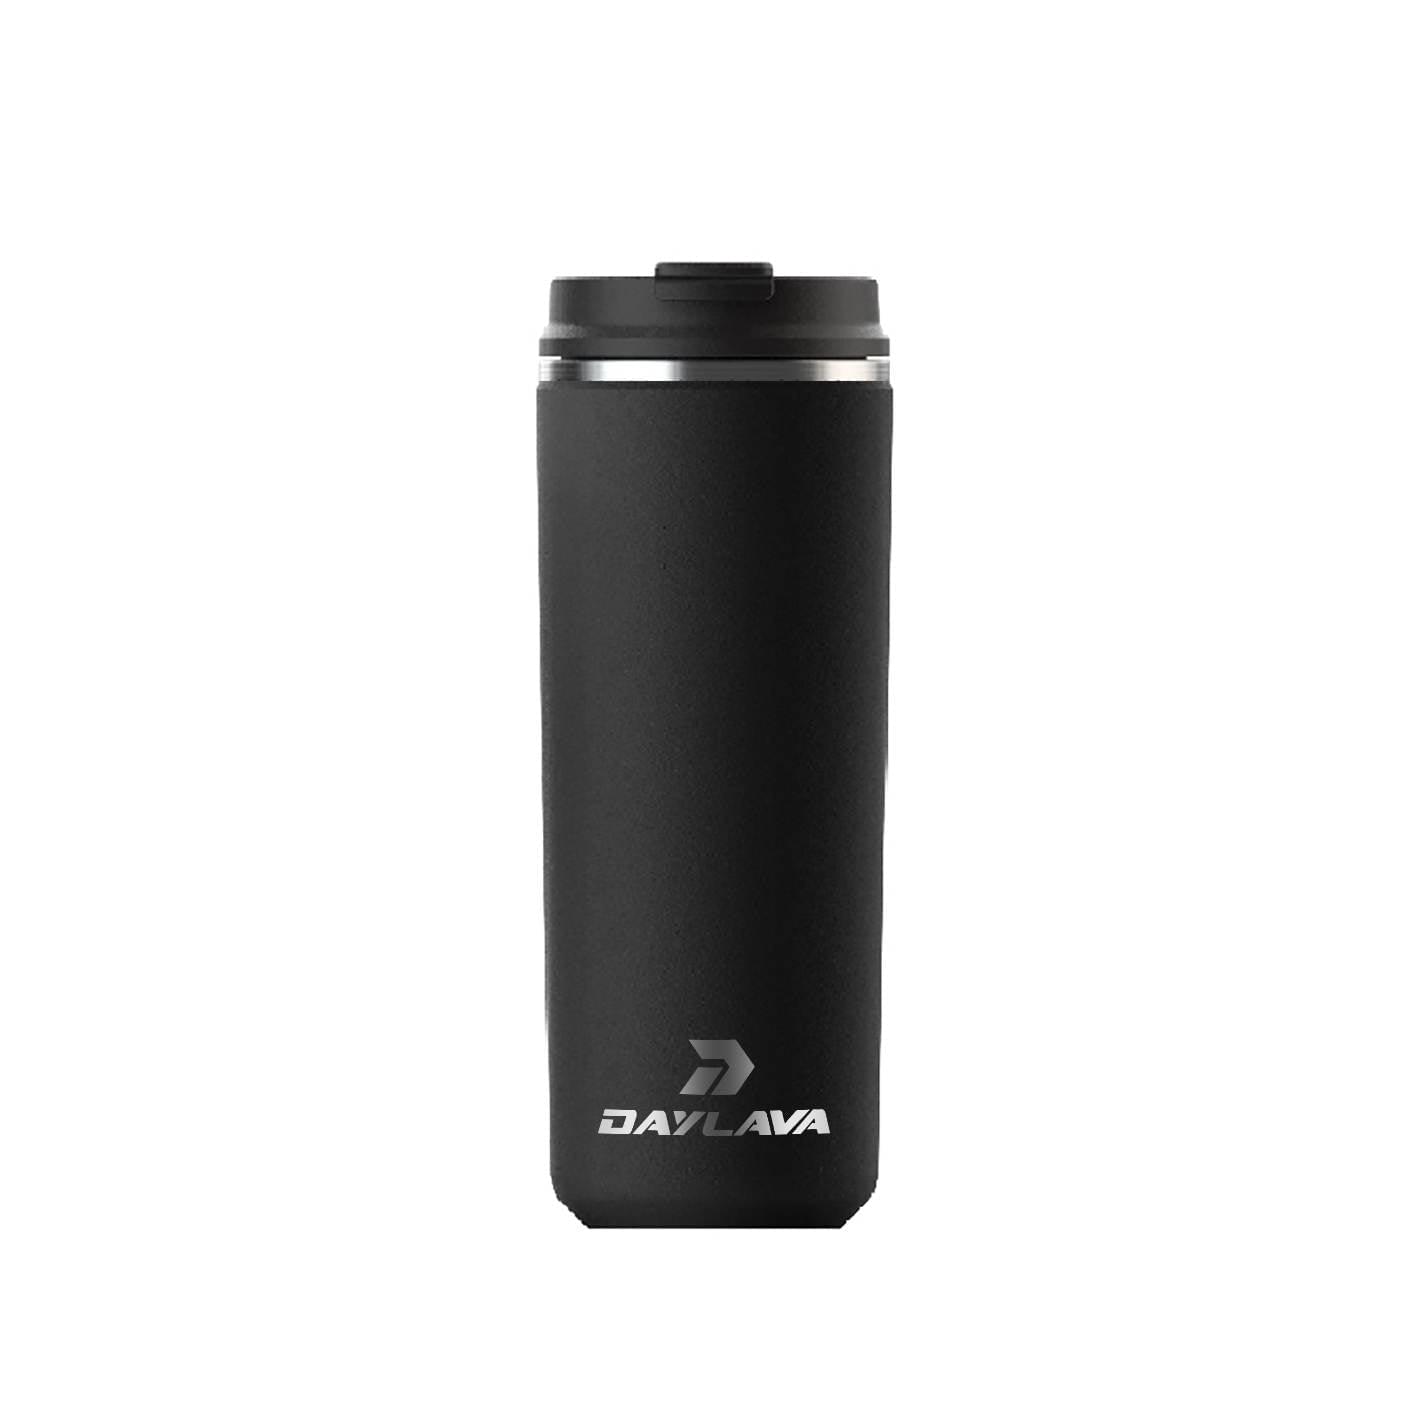 16oz Coffee Tumbler- Black - DayLava - Hydration on the GO! - The Perfect Drinkware Solution.